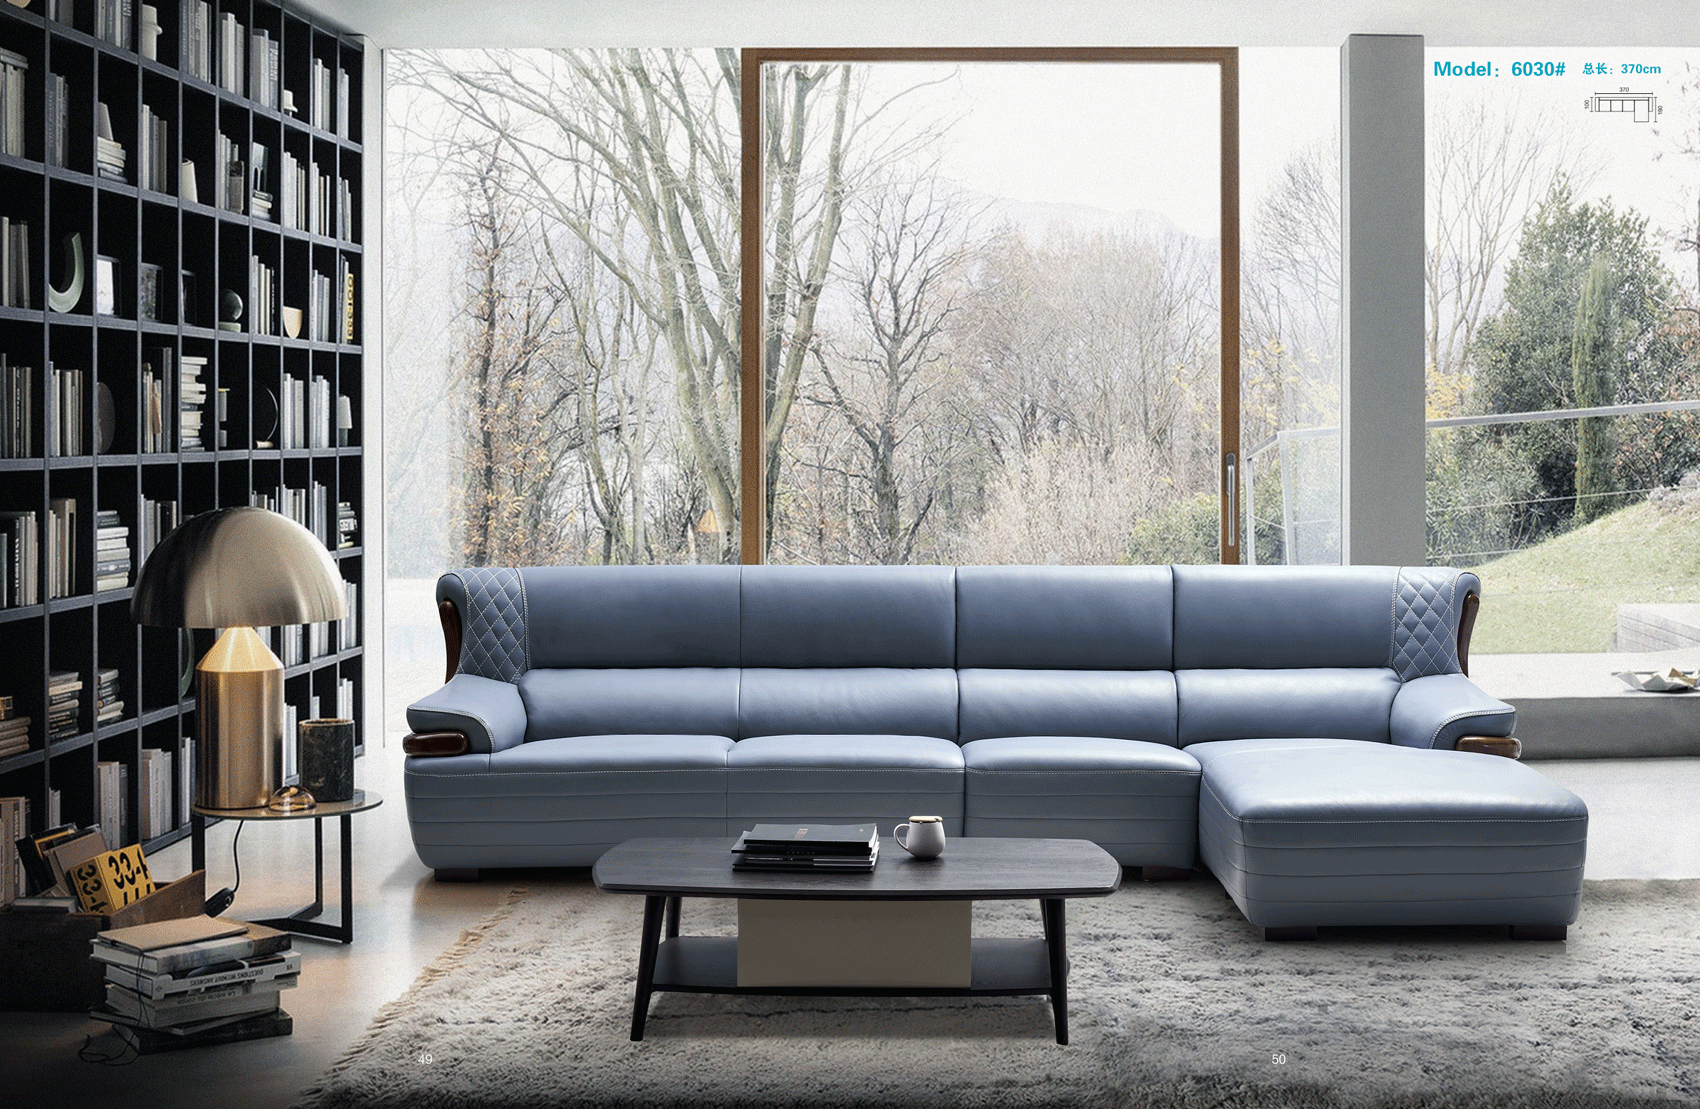 Living Room Furniture Sleepers Sofas Loveseats and Chairs 6030 Sectional